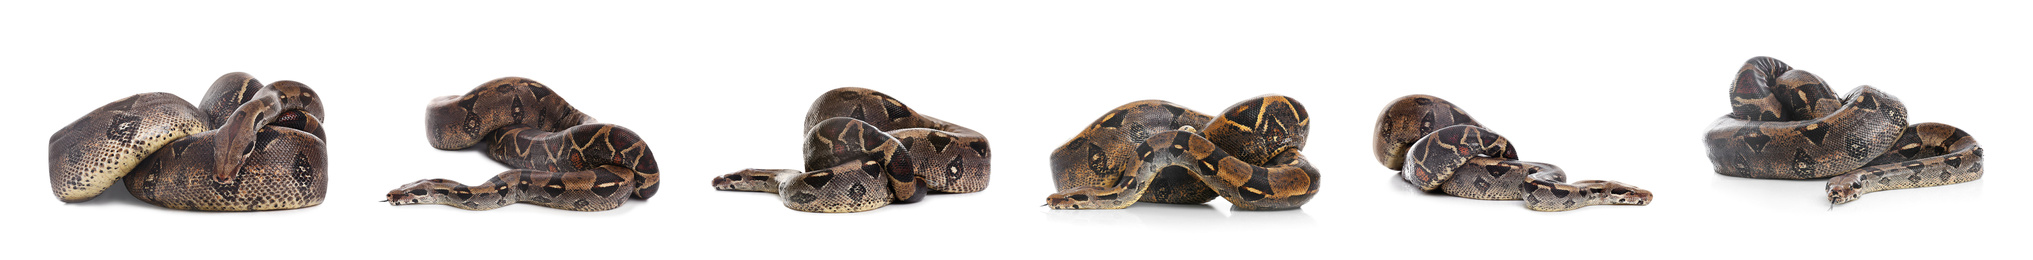 Photos of boa constrictor on white background, collage. Banner design